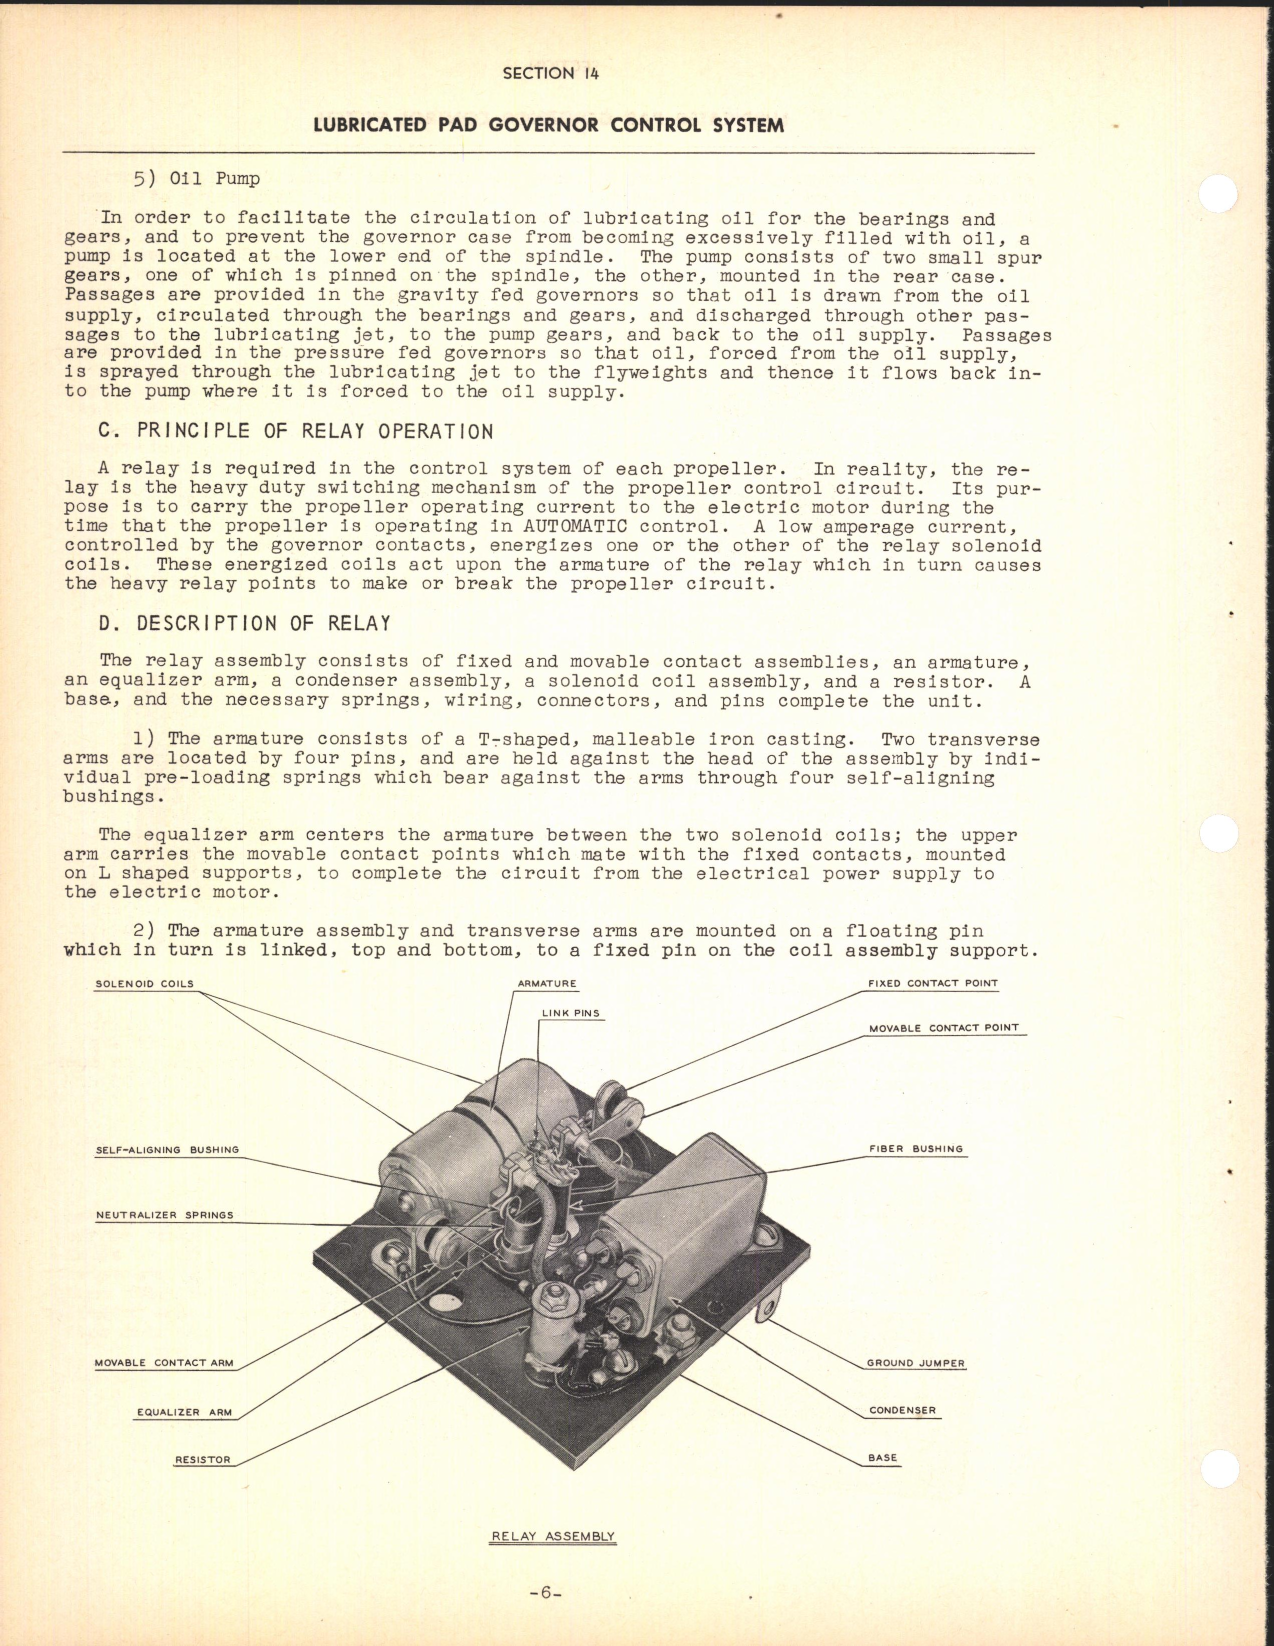 Sample page 8 from AirCorps Library document: Section 14 - Lubricated Pad Governor Control System